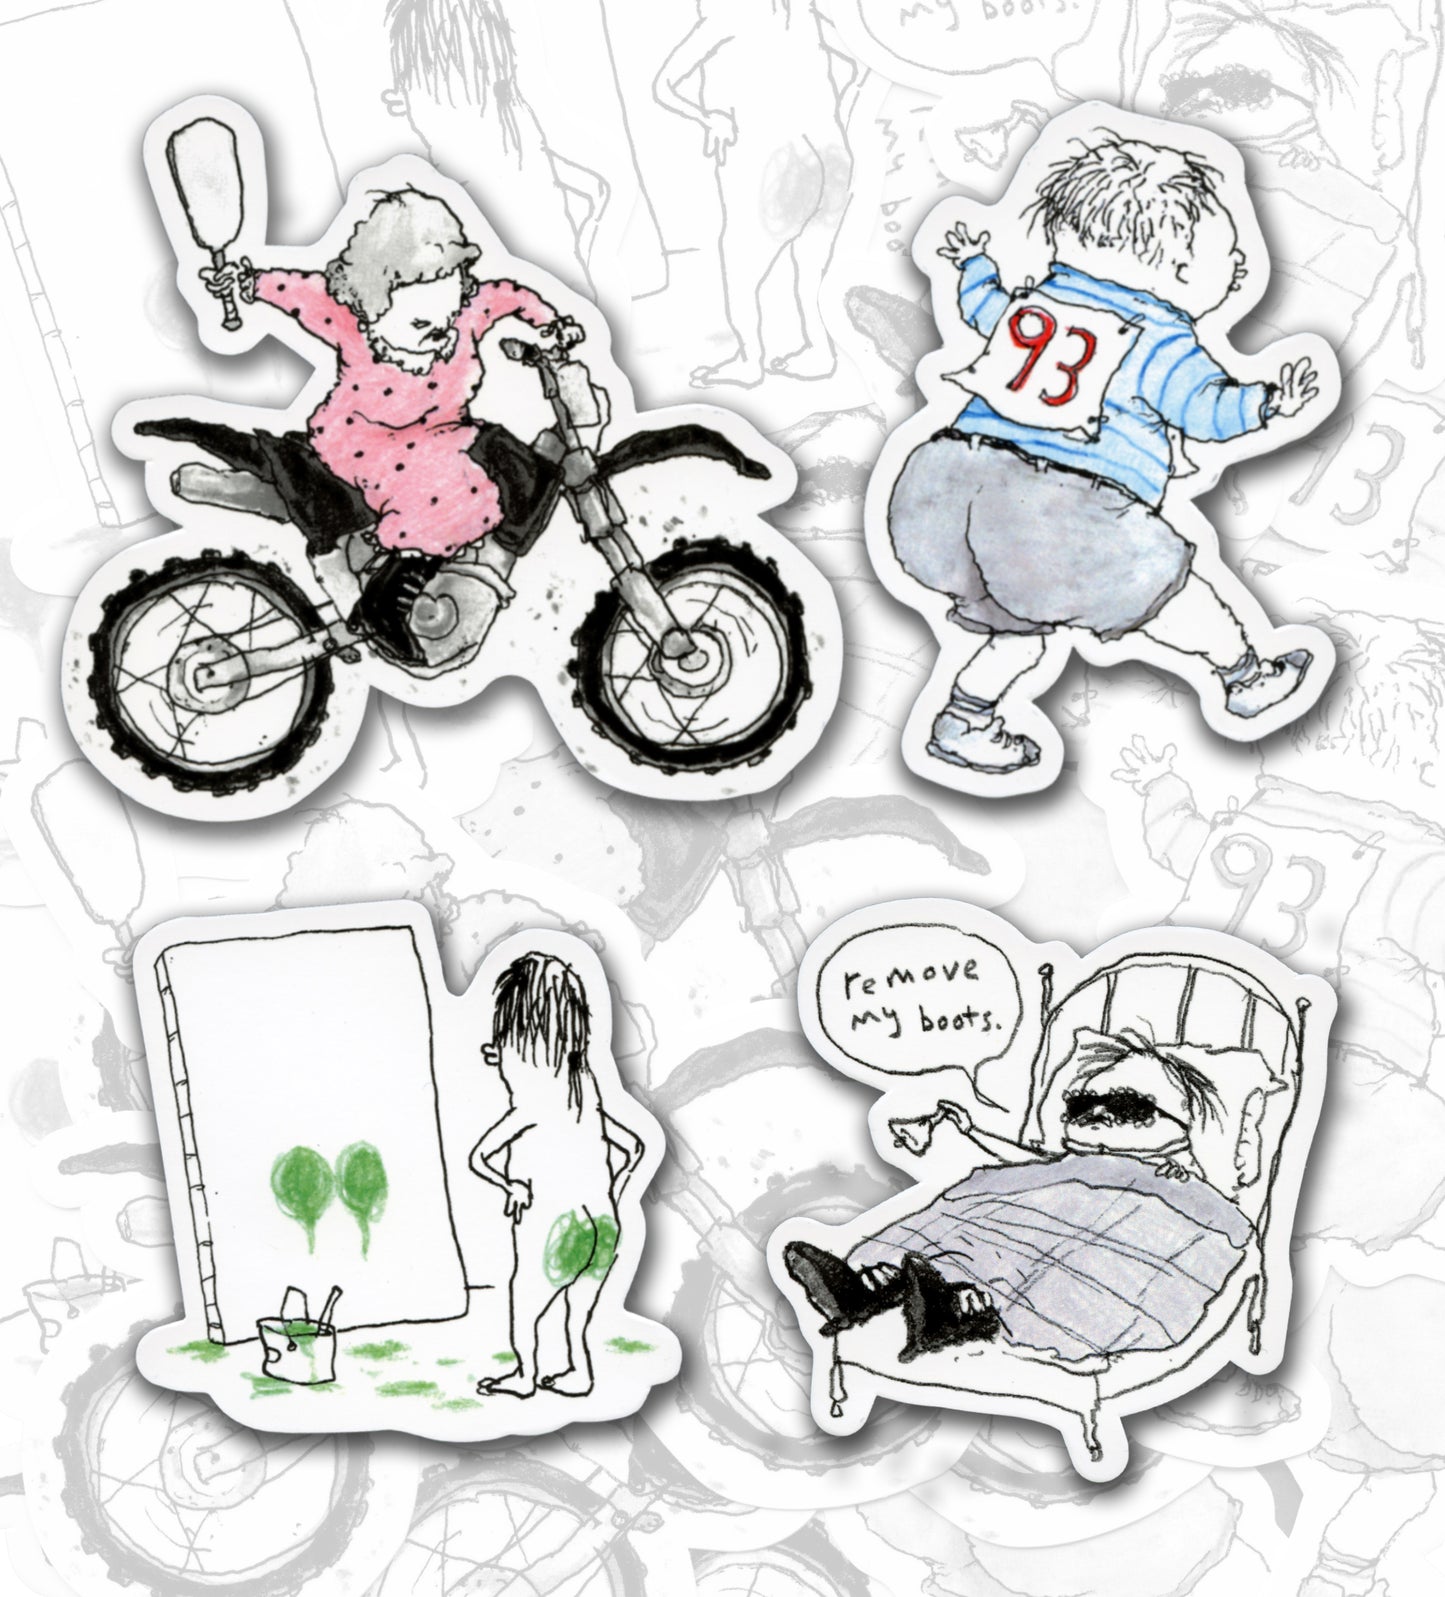 Pants Limited Edition Sticker Pack:  Vol. 4